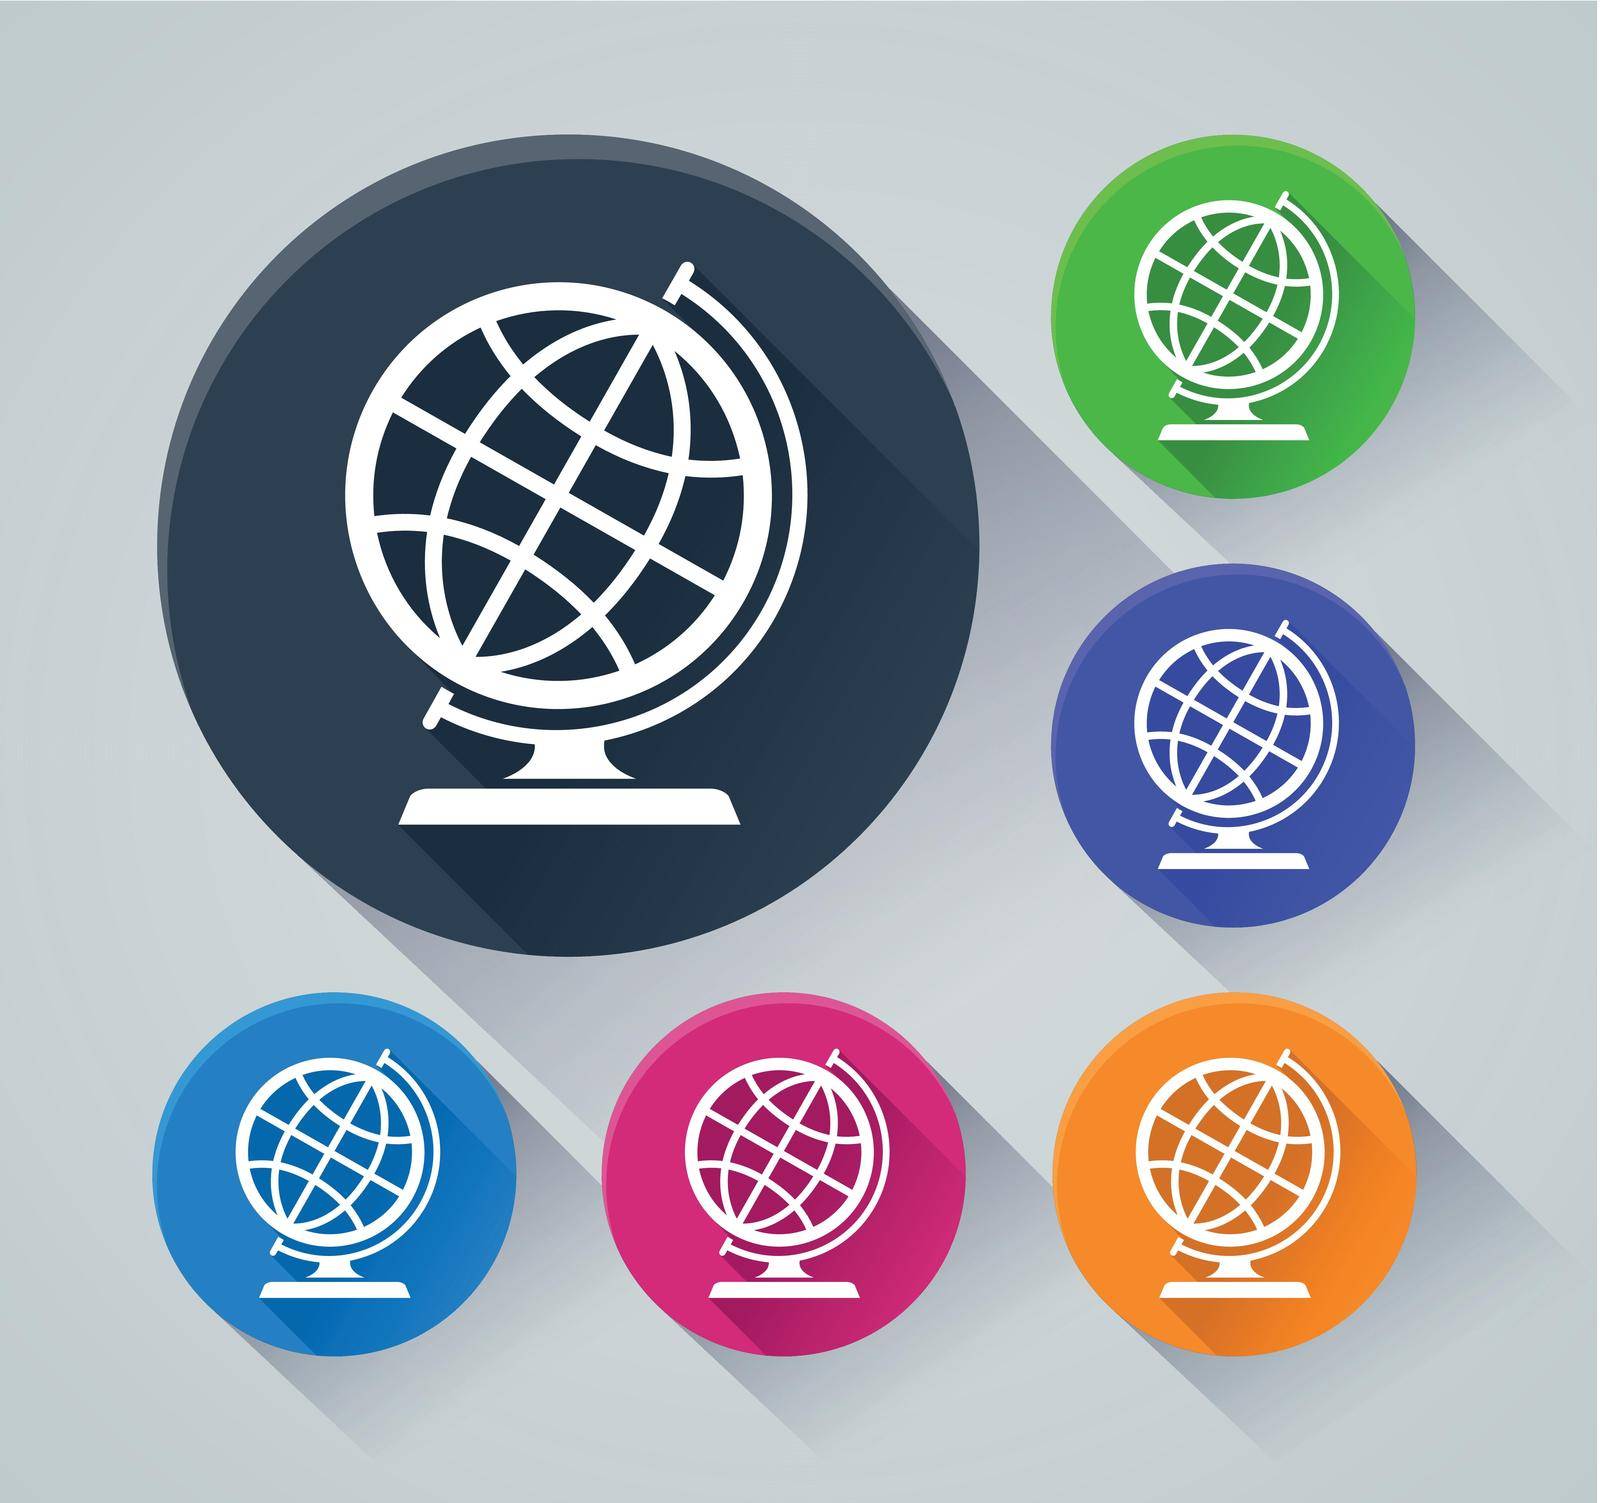 Illustration of globe circle icons with shadow